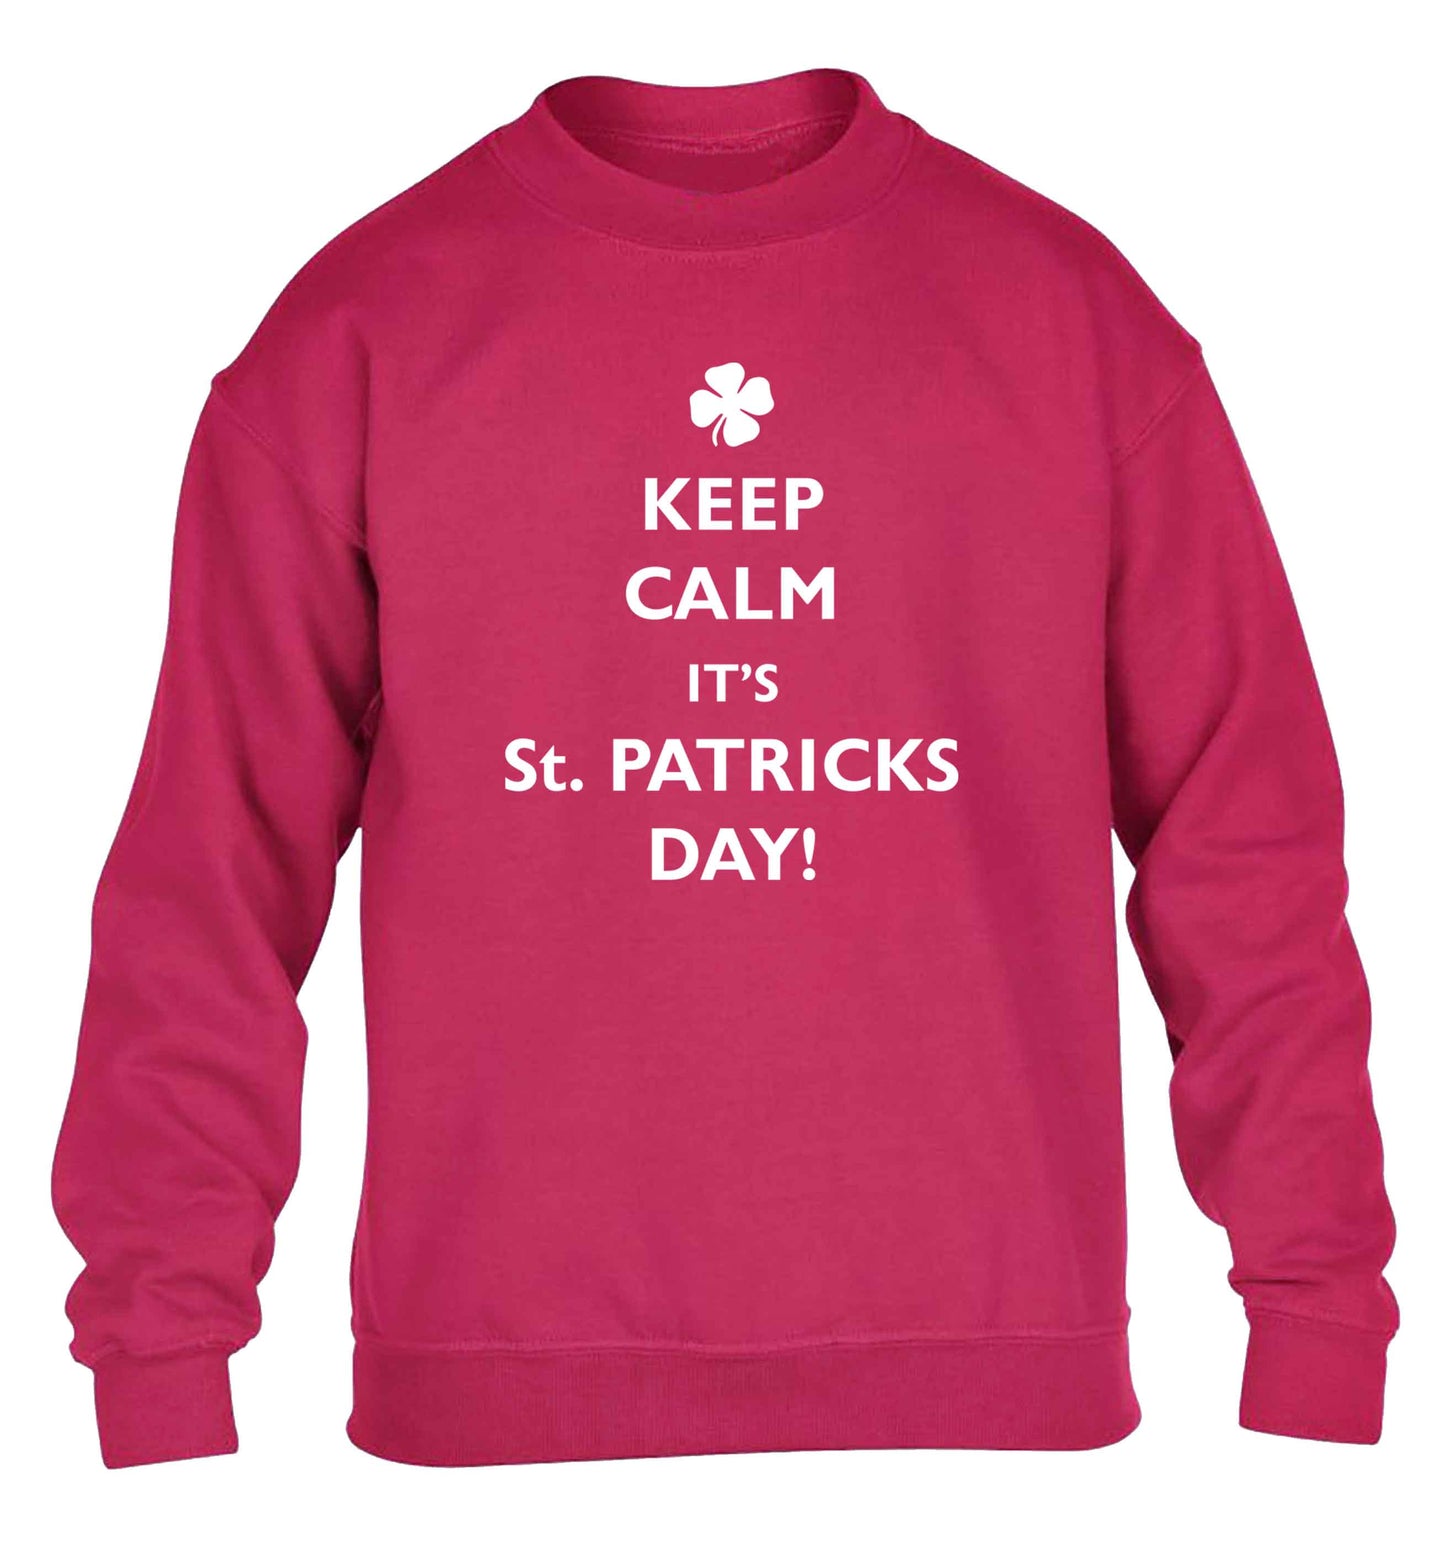 I can't keep calm it's St.Patricks day children's pink sweater 12-13 Years